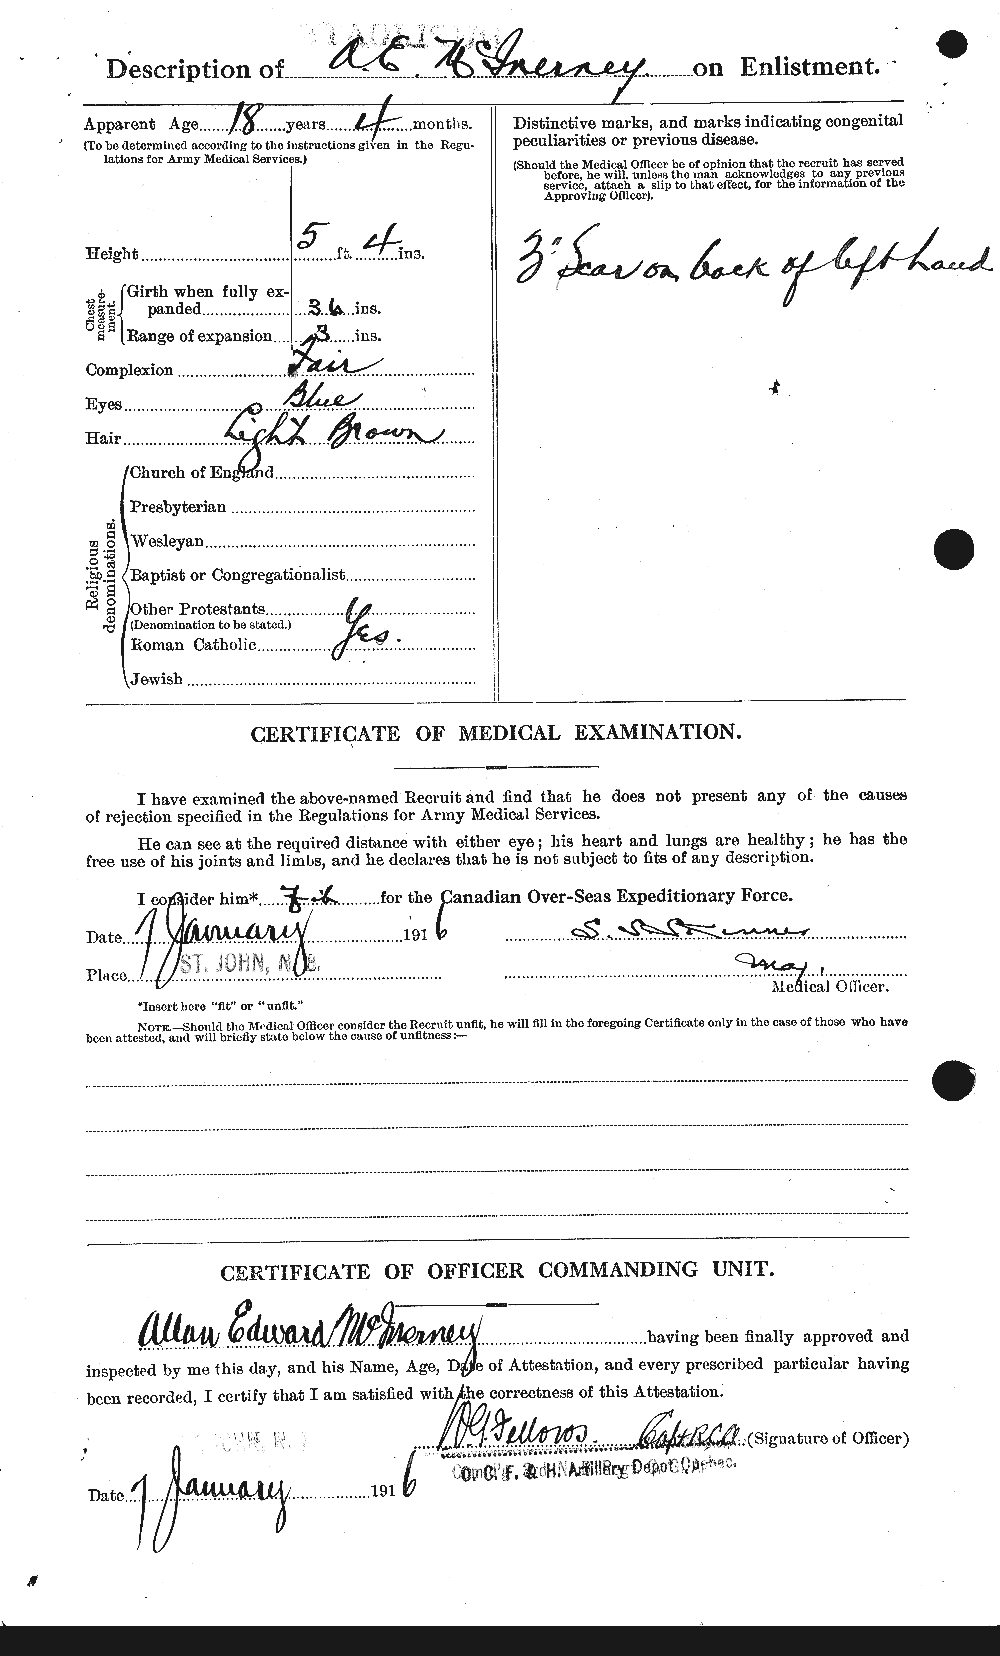 Personnel Records of the First World War - CEF 526569b